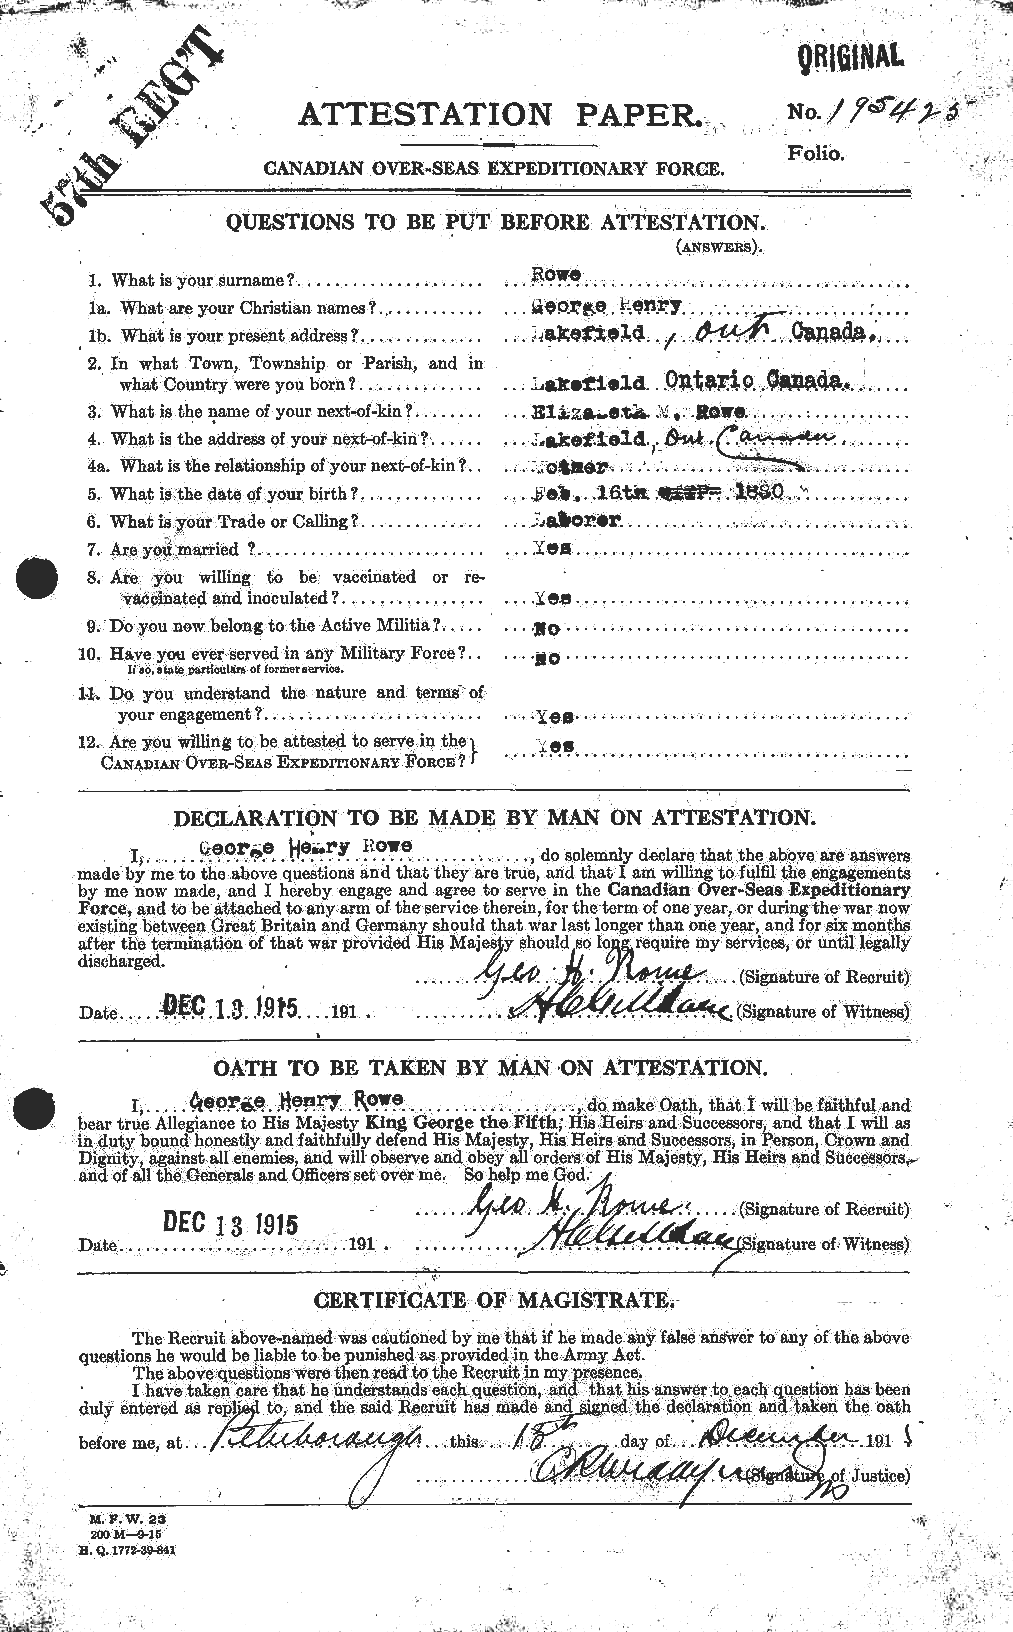 Personnel Records of the First World War - CEF 615882a